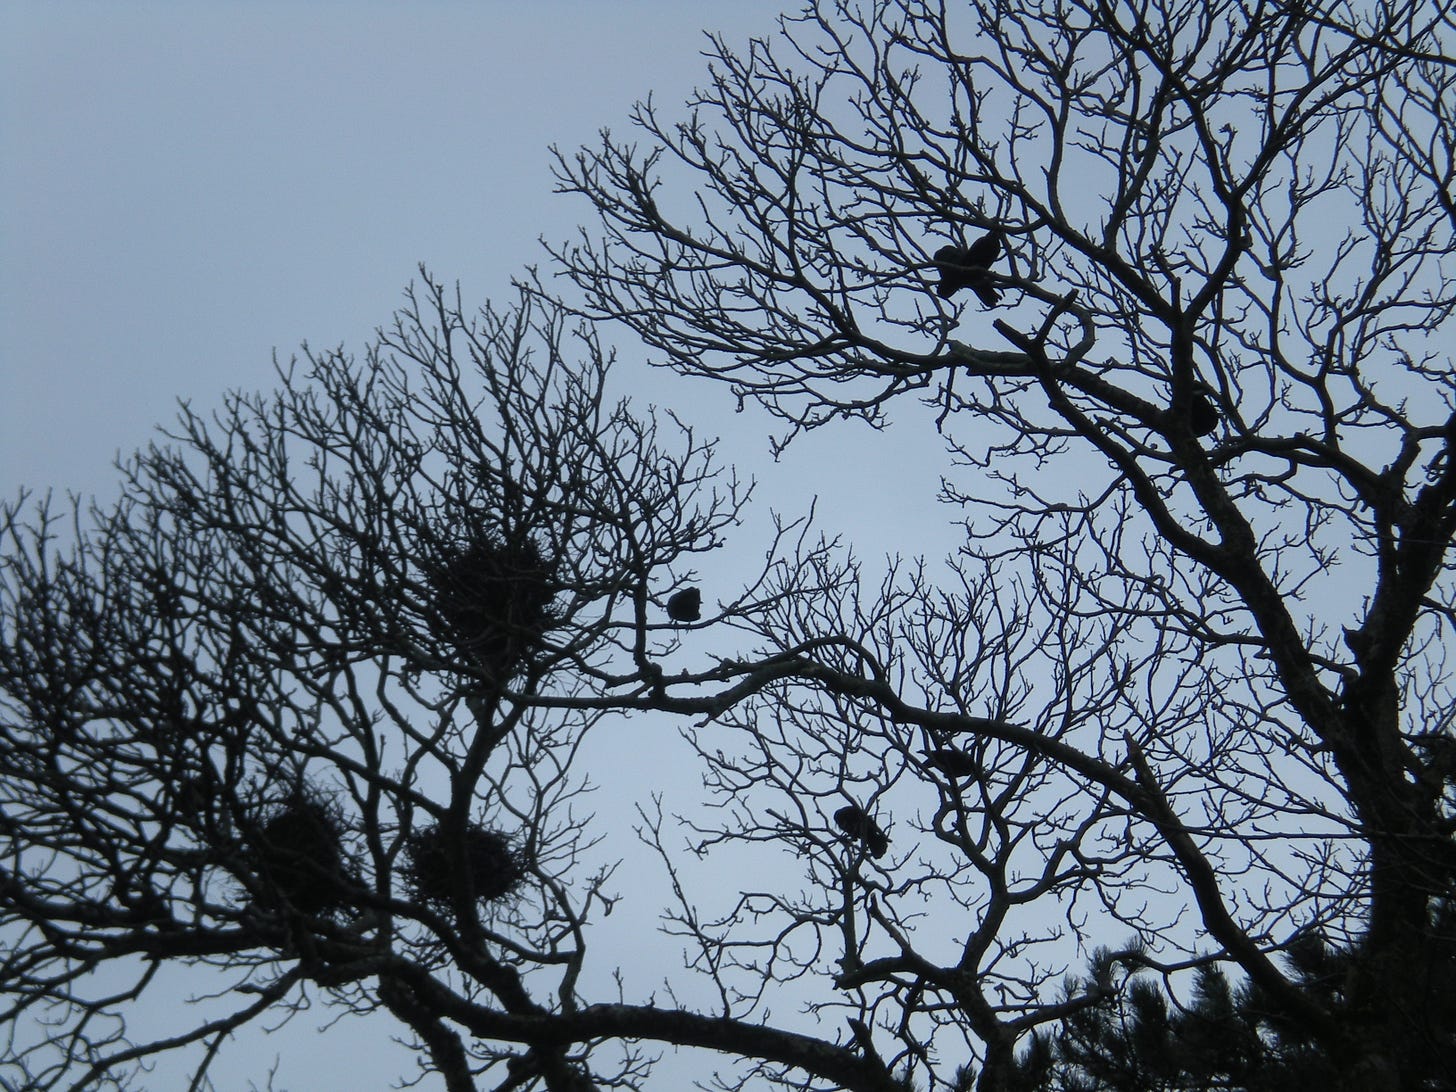 Crows perch on black limbs that also hold large nests, against a gray sky.